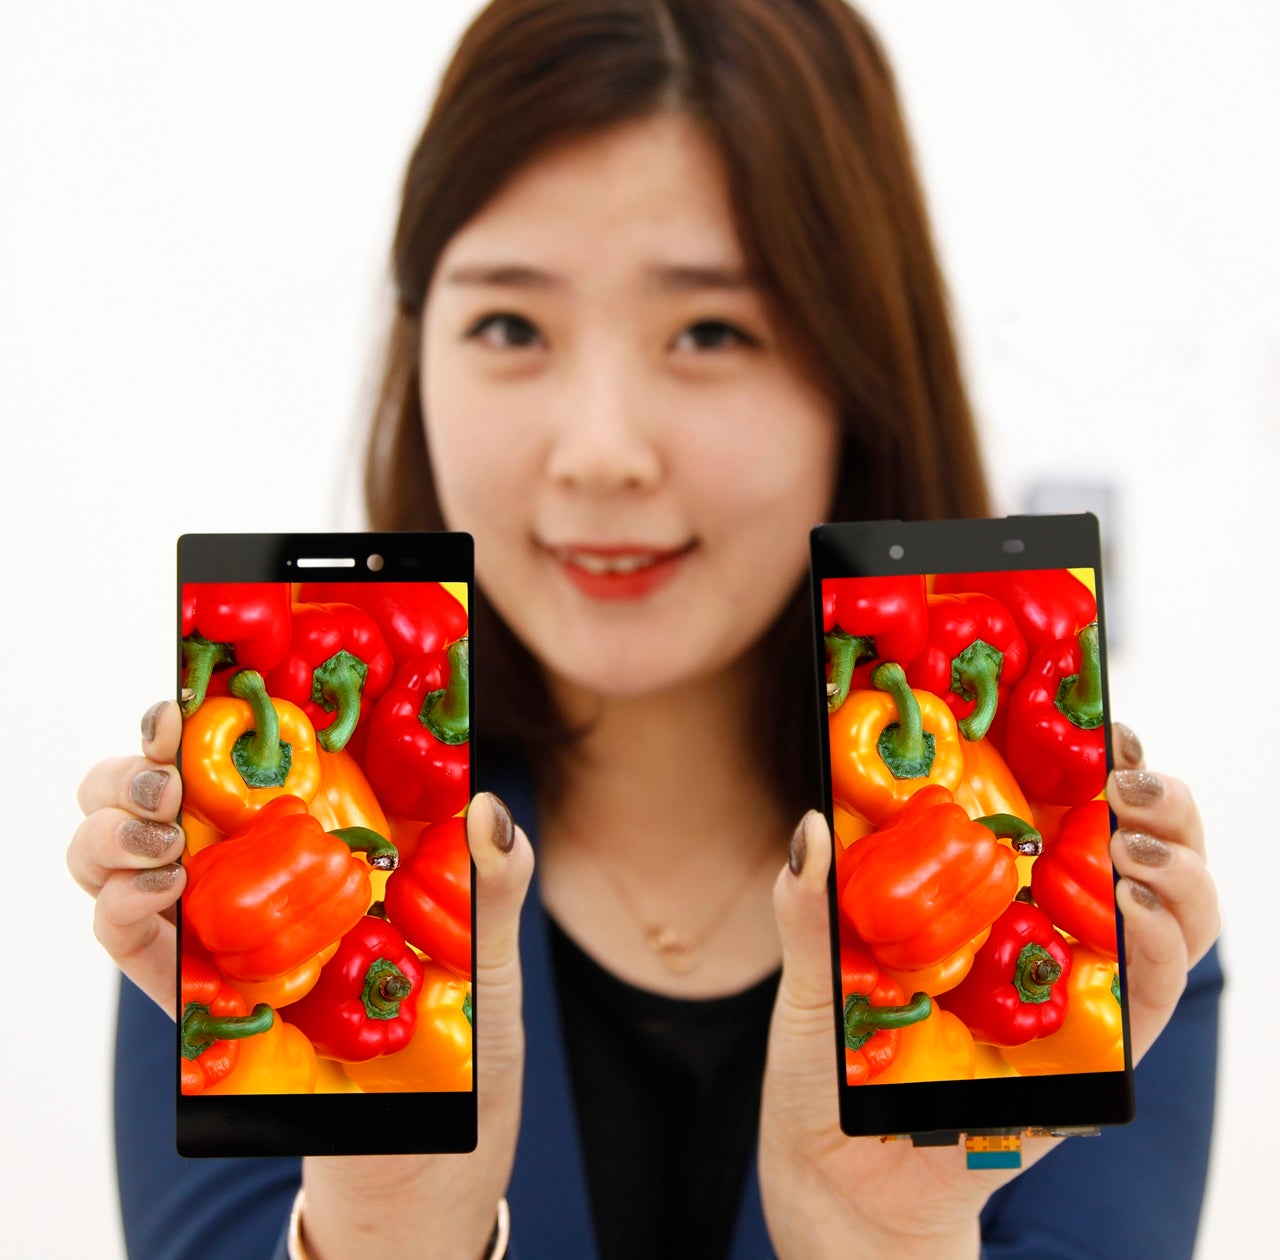 LG outs a durable 5.3" display with the world's narrowest bezel